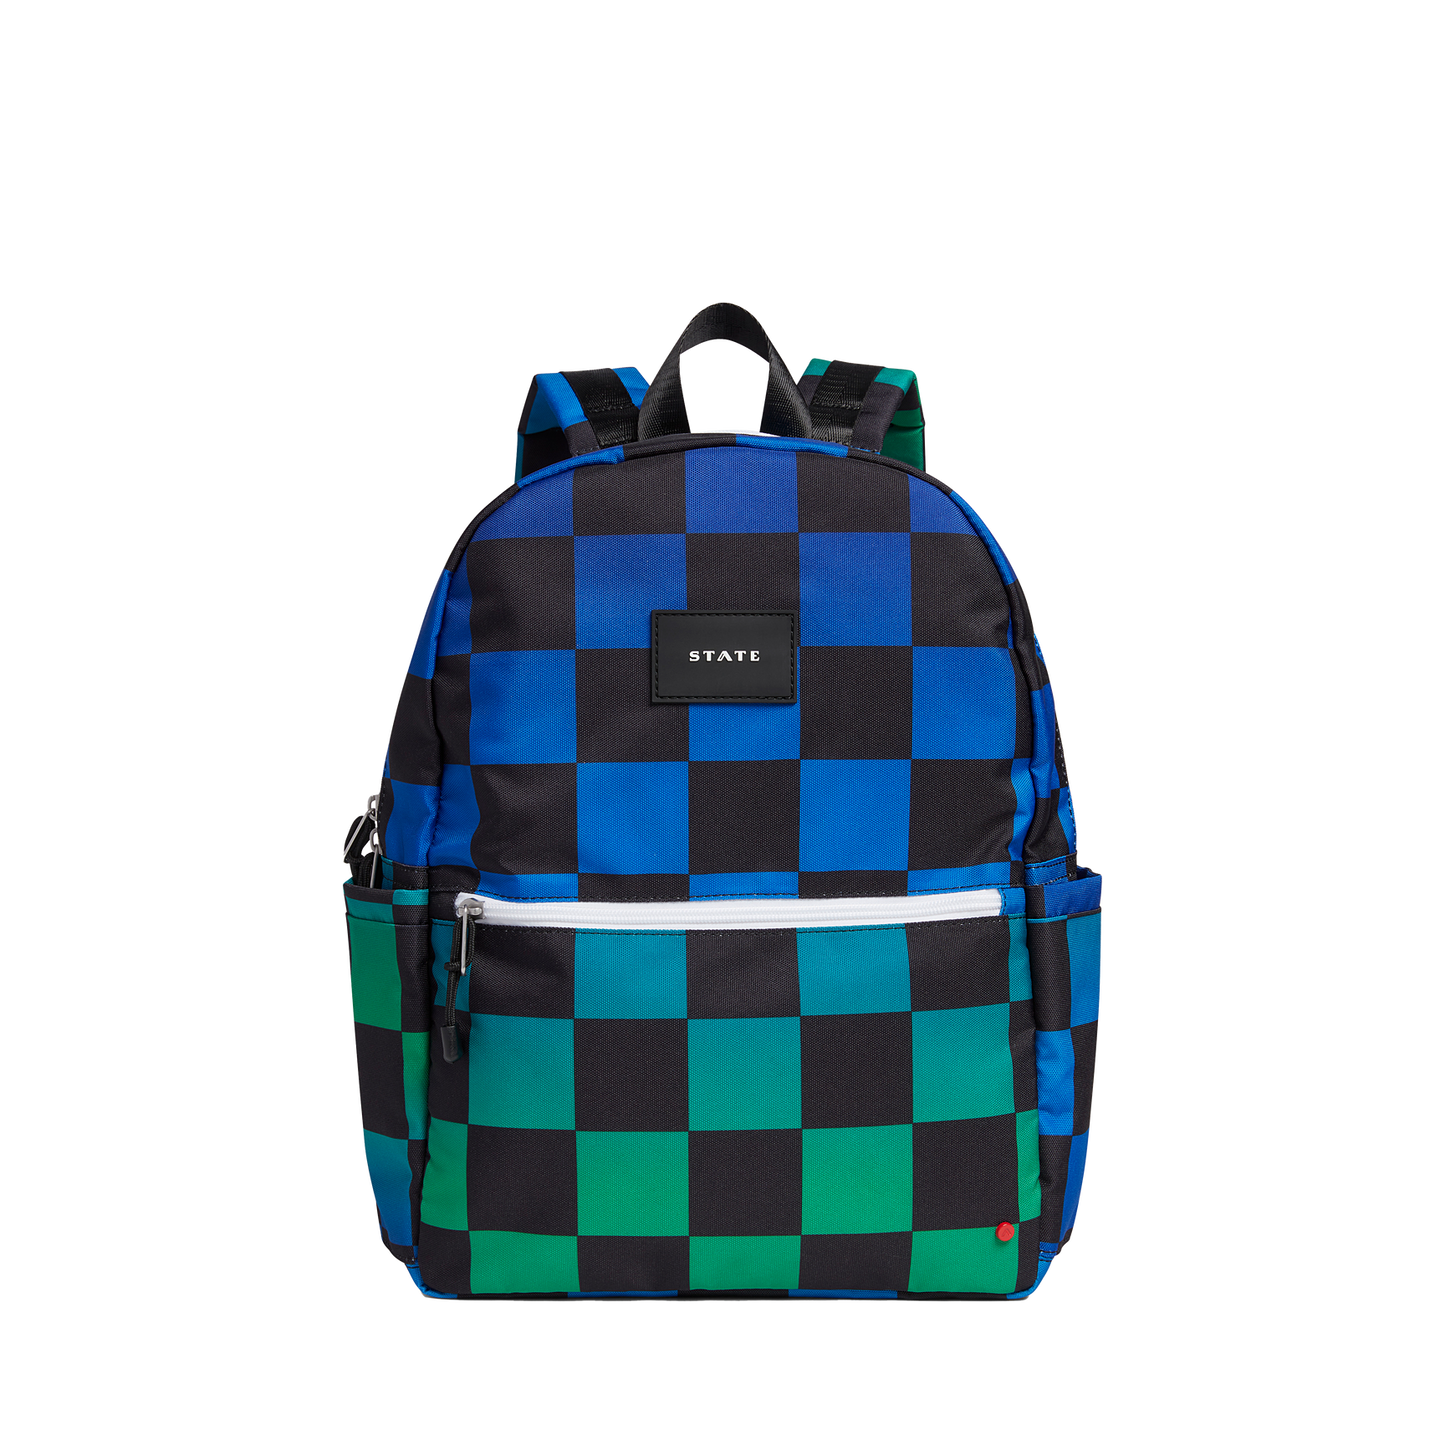 STATE Kane Kids Double Pocket Gradient Check Backpack